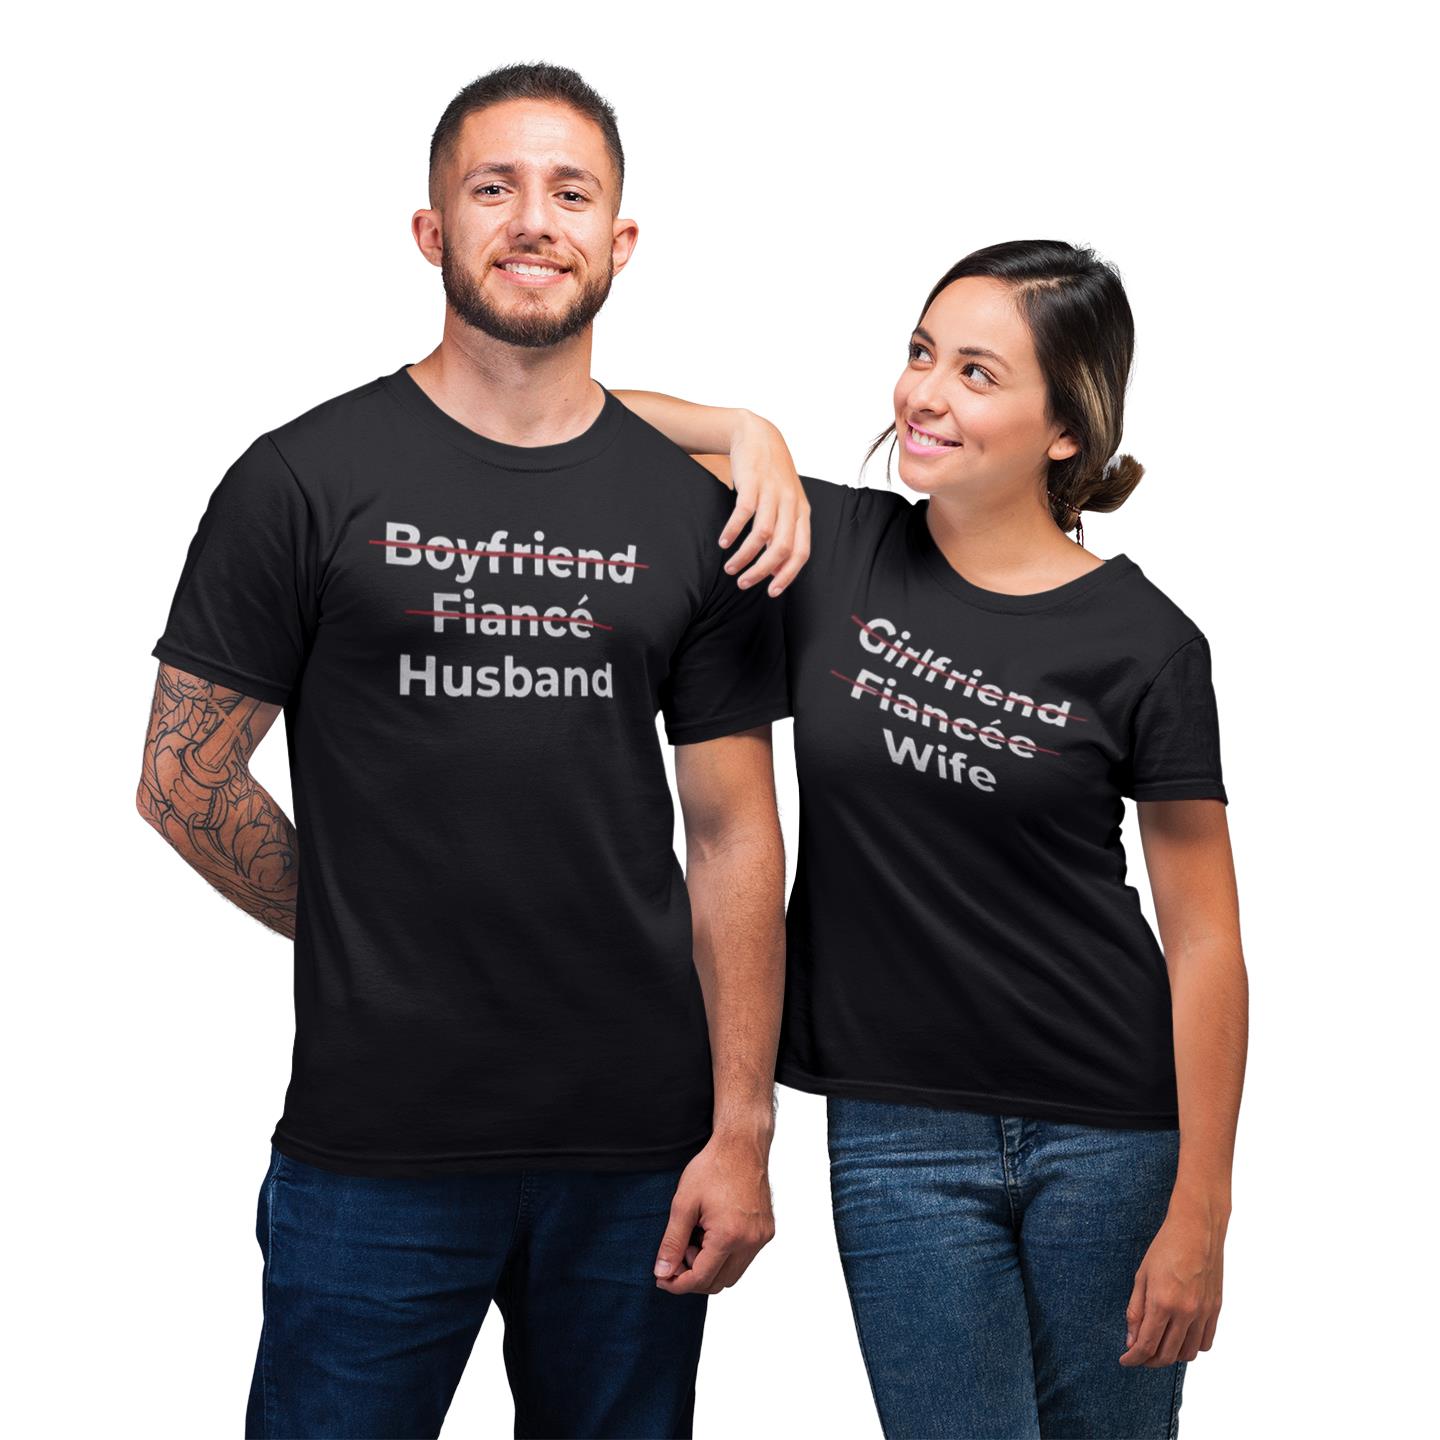 Fiance Become Husband Wife Shirt For Family T-shirt